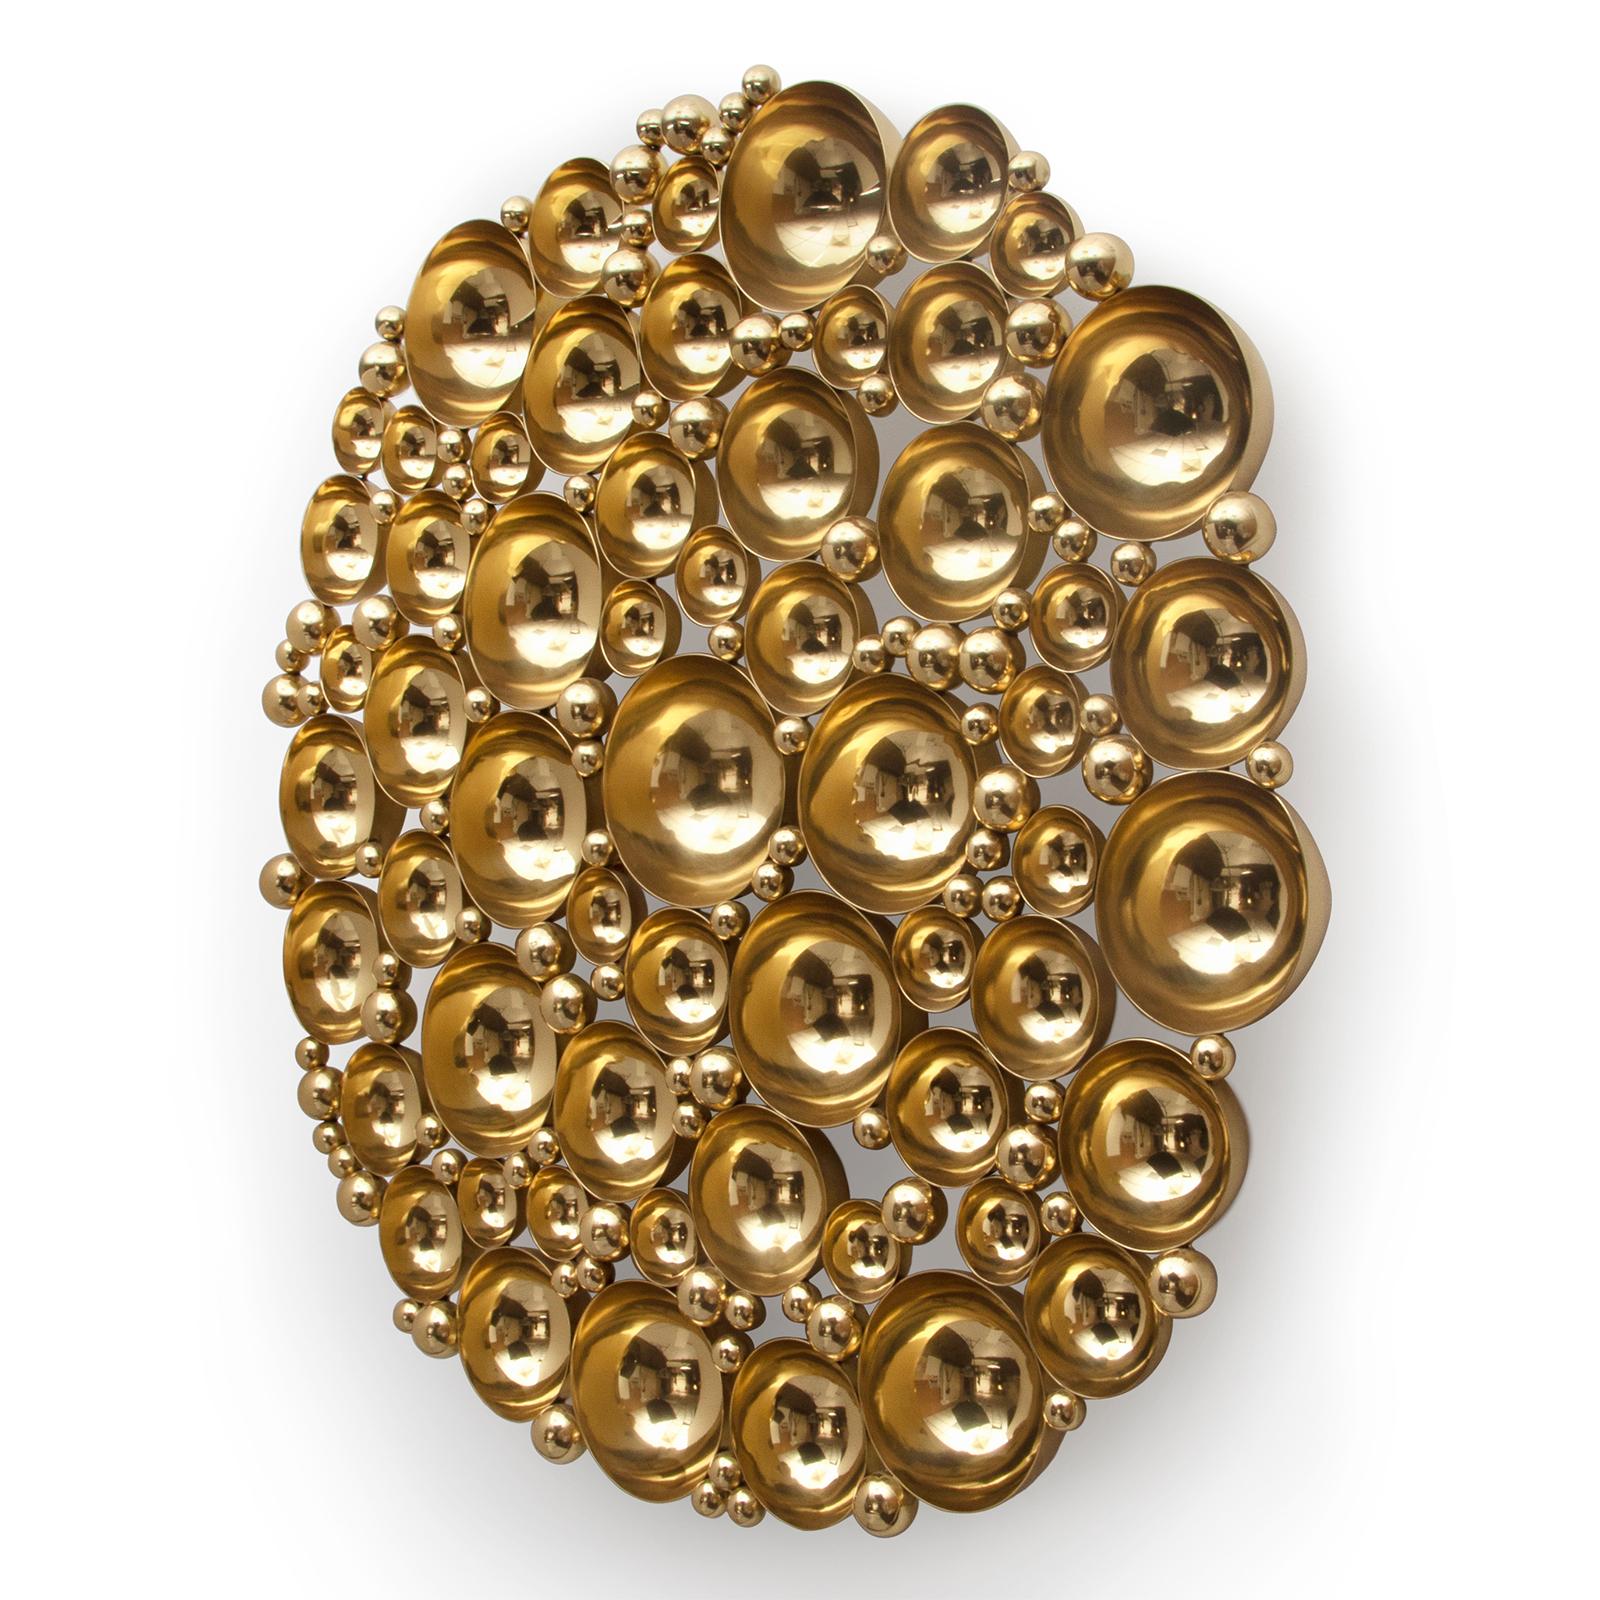 Mirror Bubbles with all structure in polished aluminium,
assembled concave half spheres in gold finish.